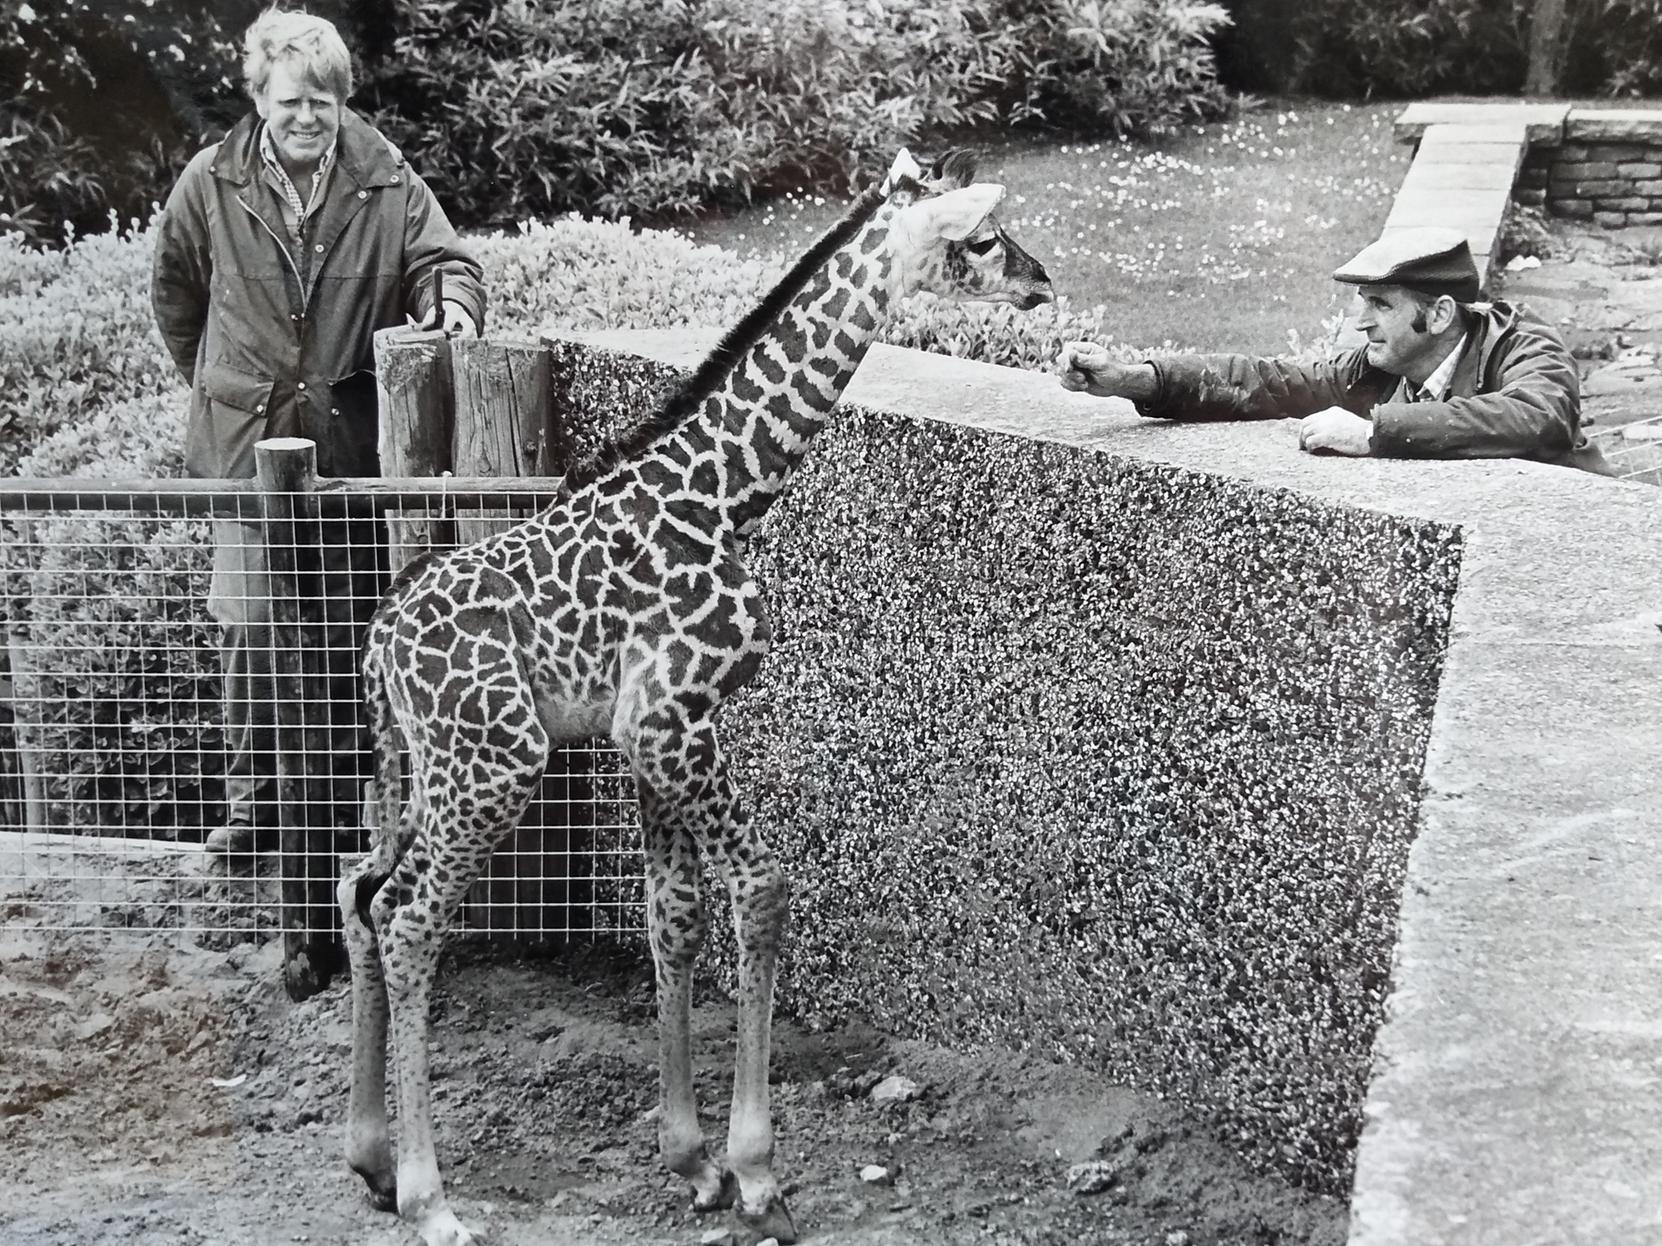 Three-day-old Jasper the baby giraffe having a look at the humans during a wander in the compound at Blackpool Zoo, June 1981